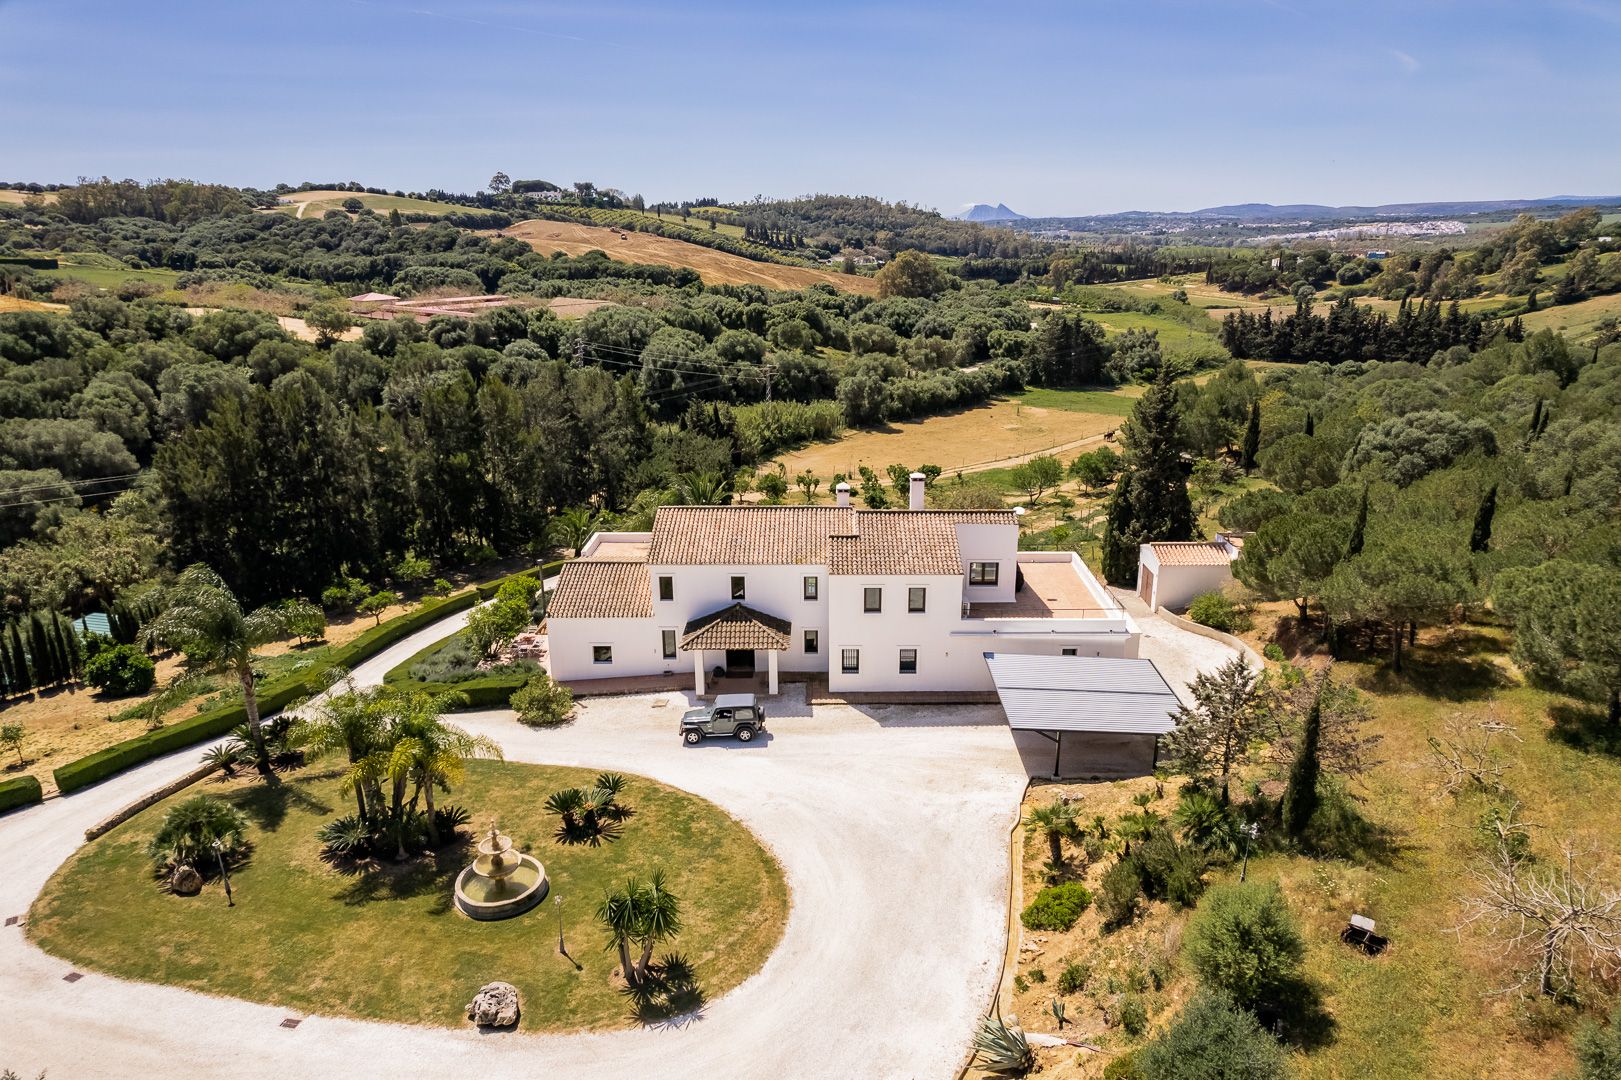 Finca only minutes away from Sotogrande